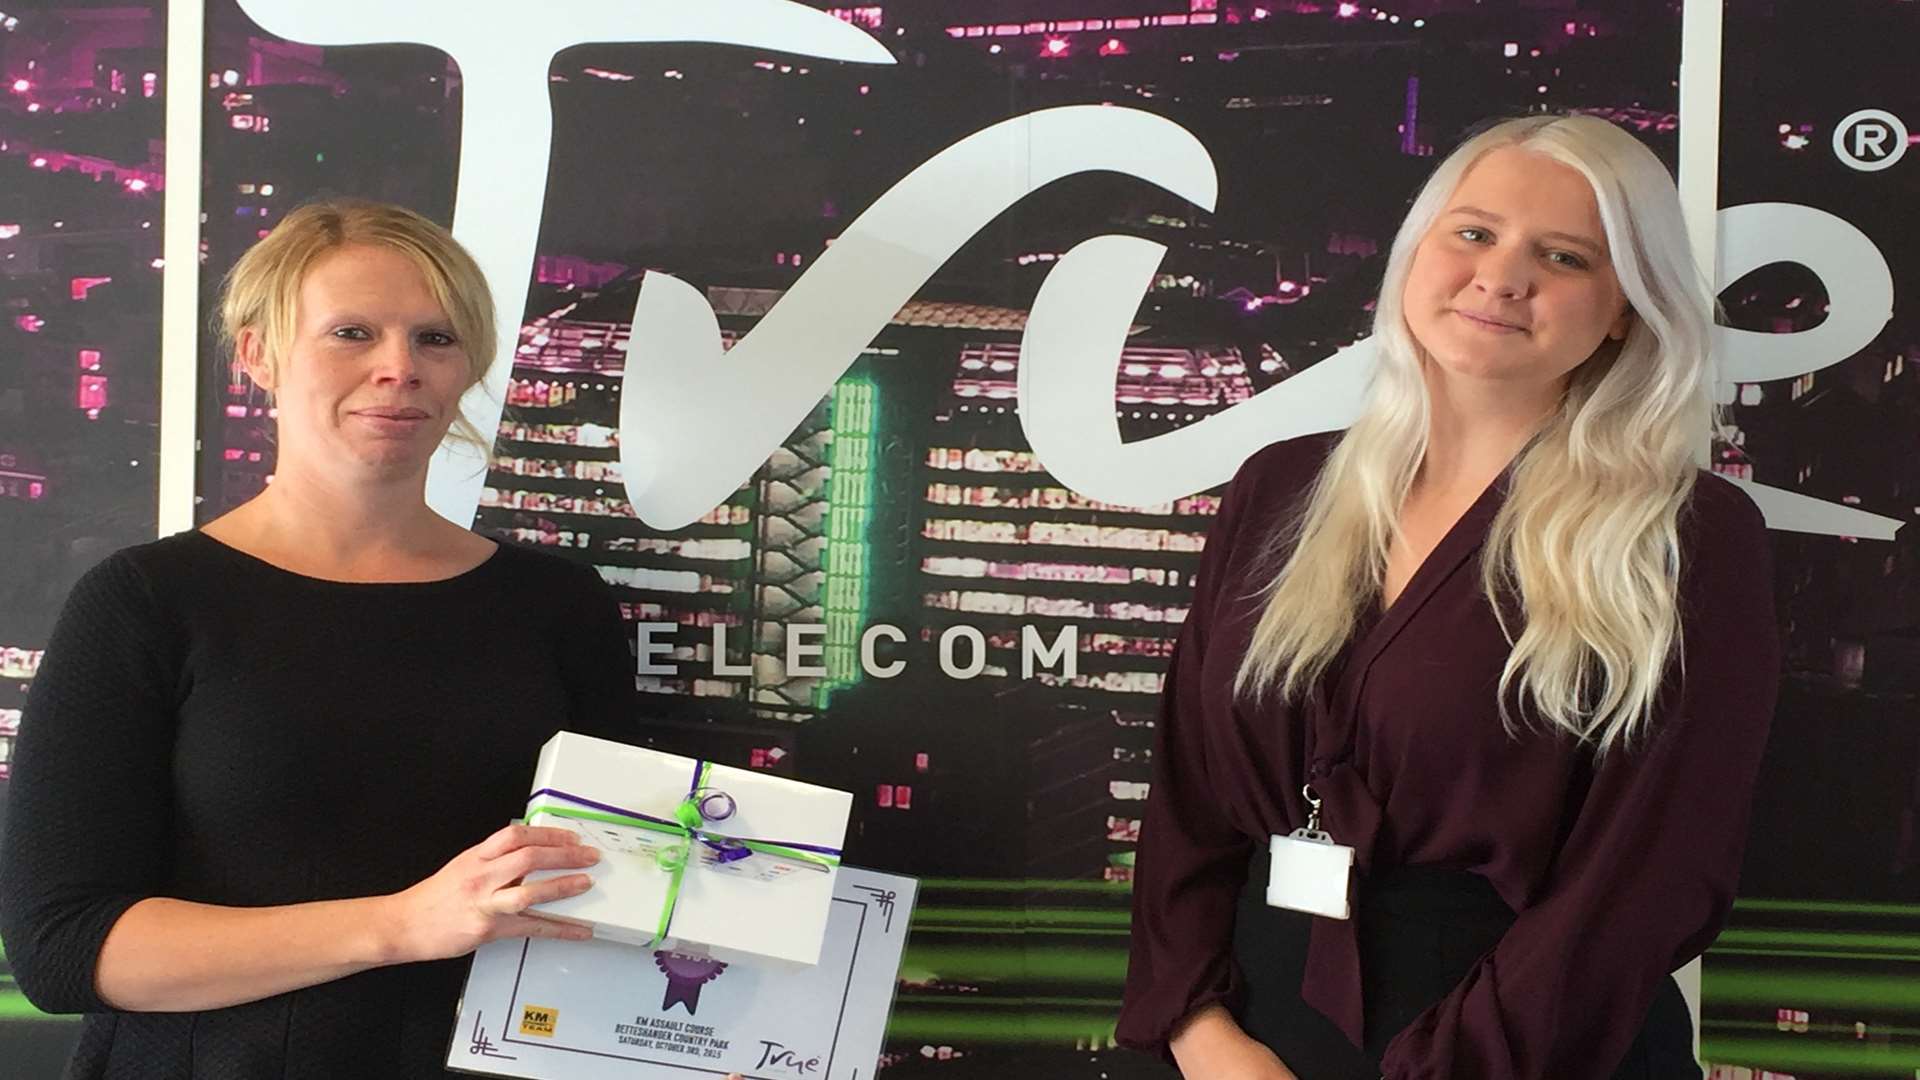 Aimee Smith, biggest individual fundraiser at the KM Assault Course challenge, collects her prize of an iPad mini from Fern Hugill of True Telecom.